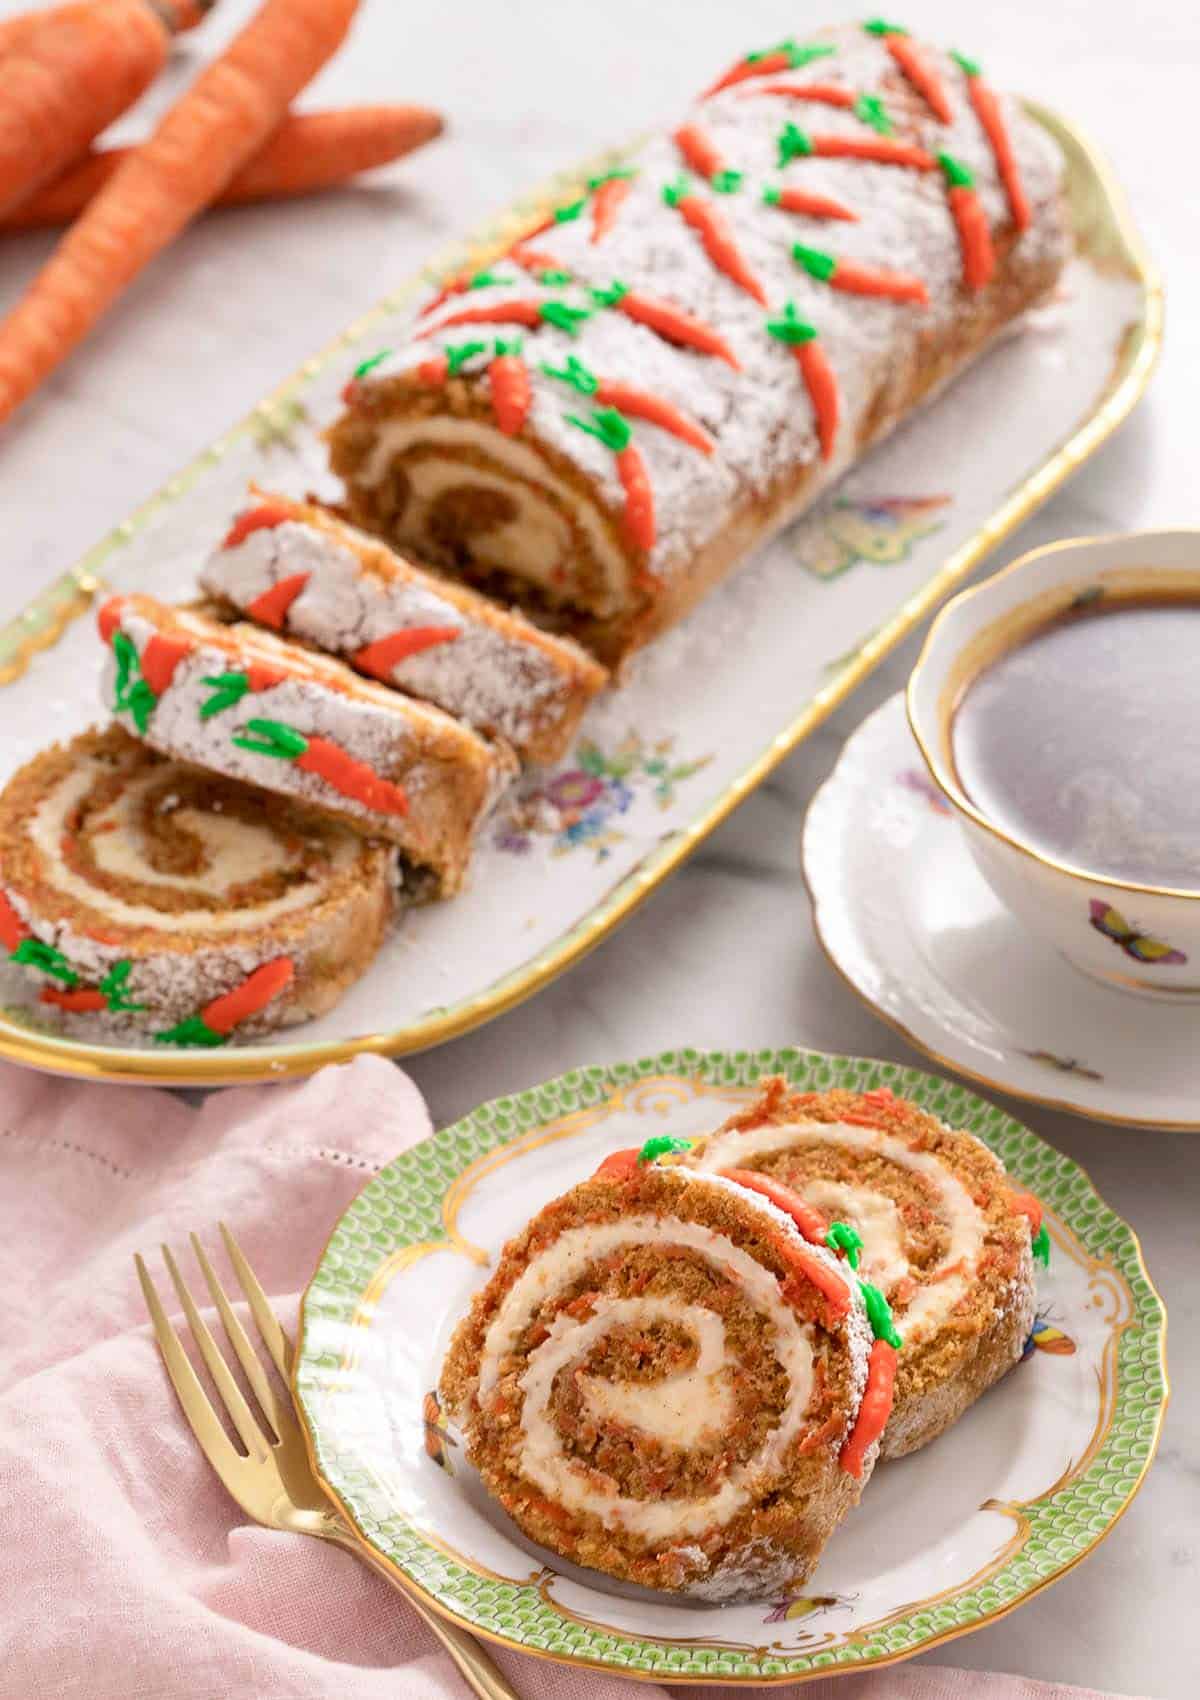 A close up of slices of a carrot cake roll on a plate